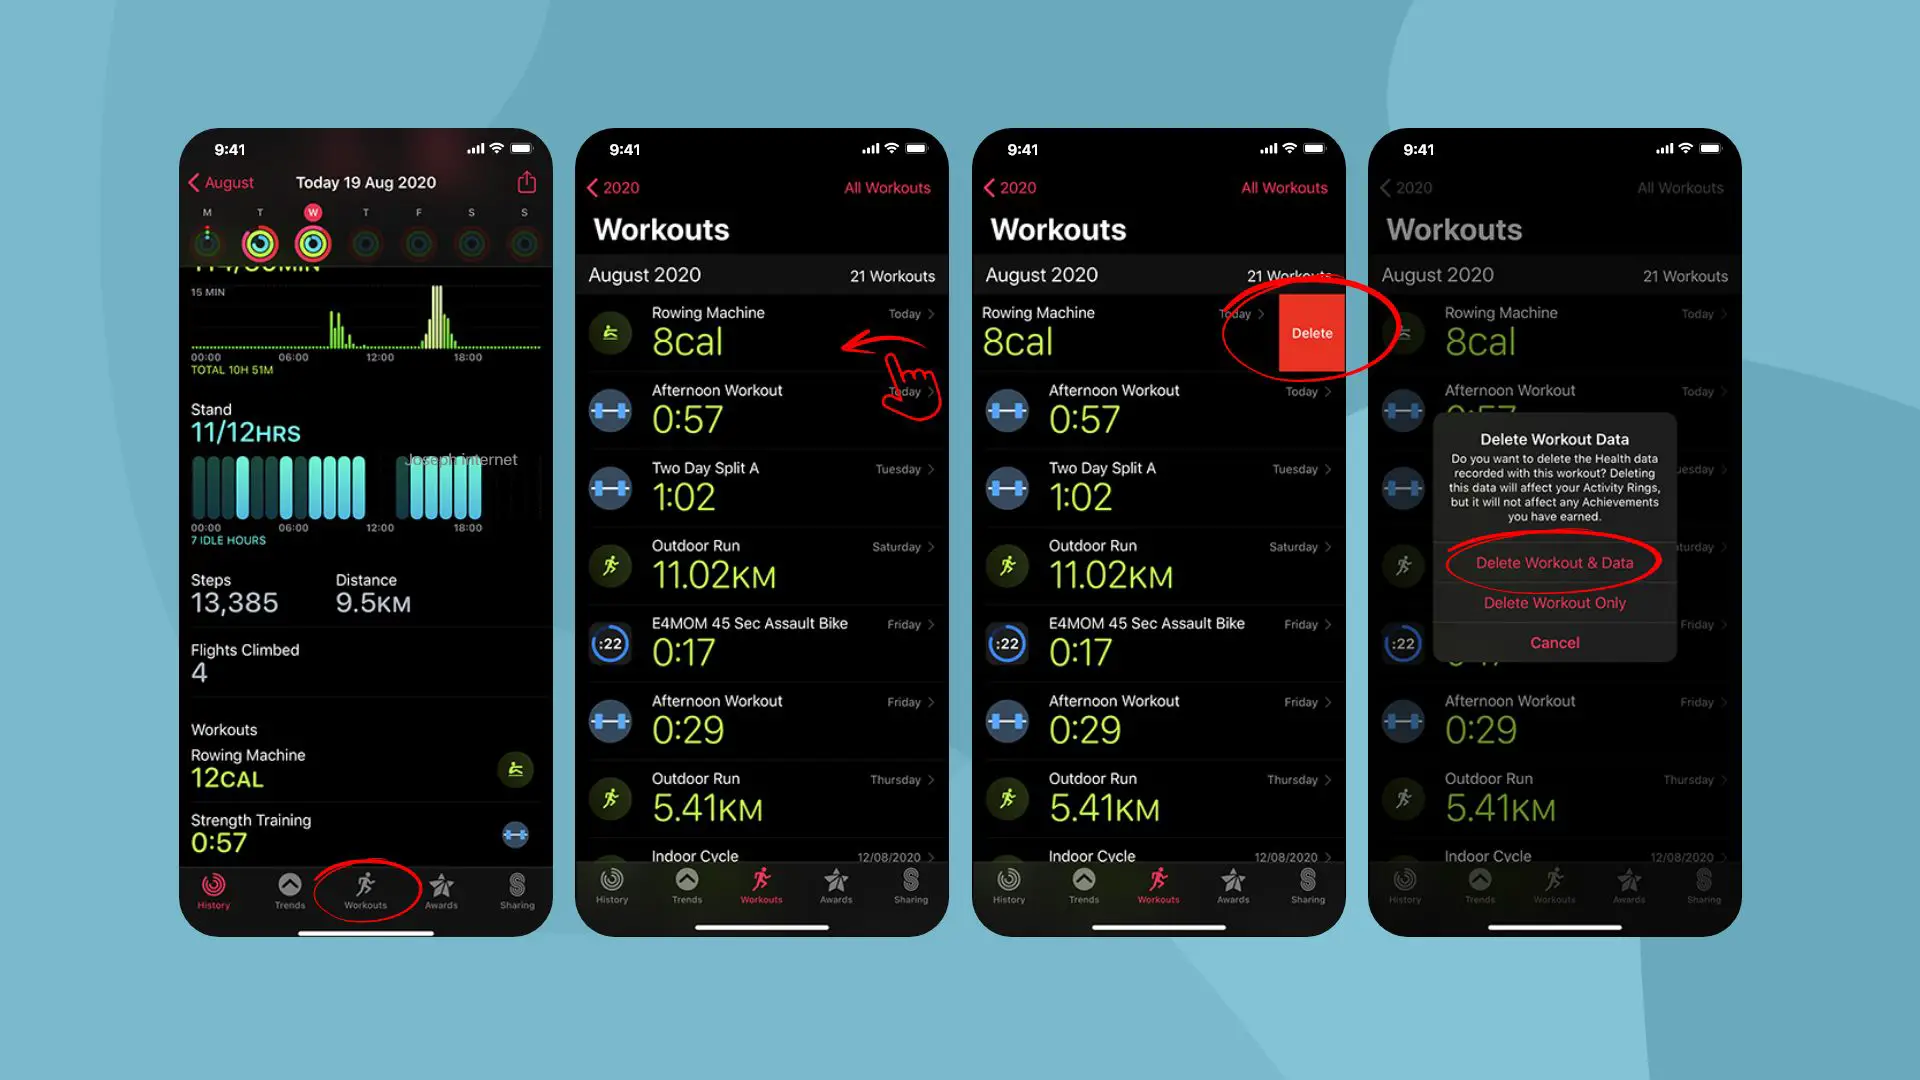 Steps on how to erase exercise minutes on Apple Watch using the Fitness app